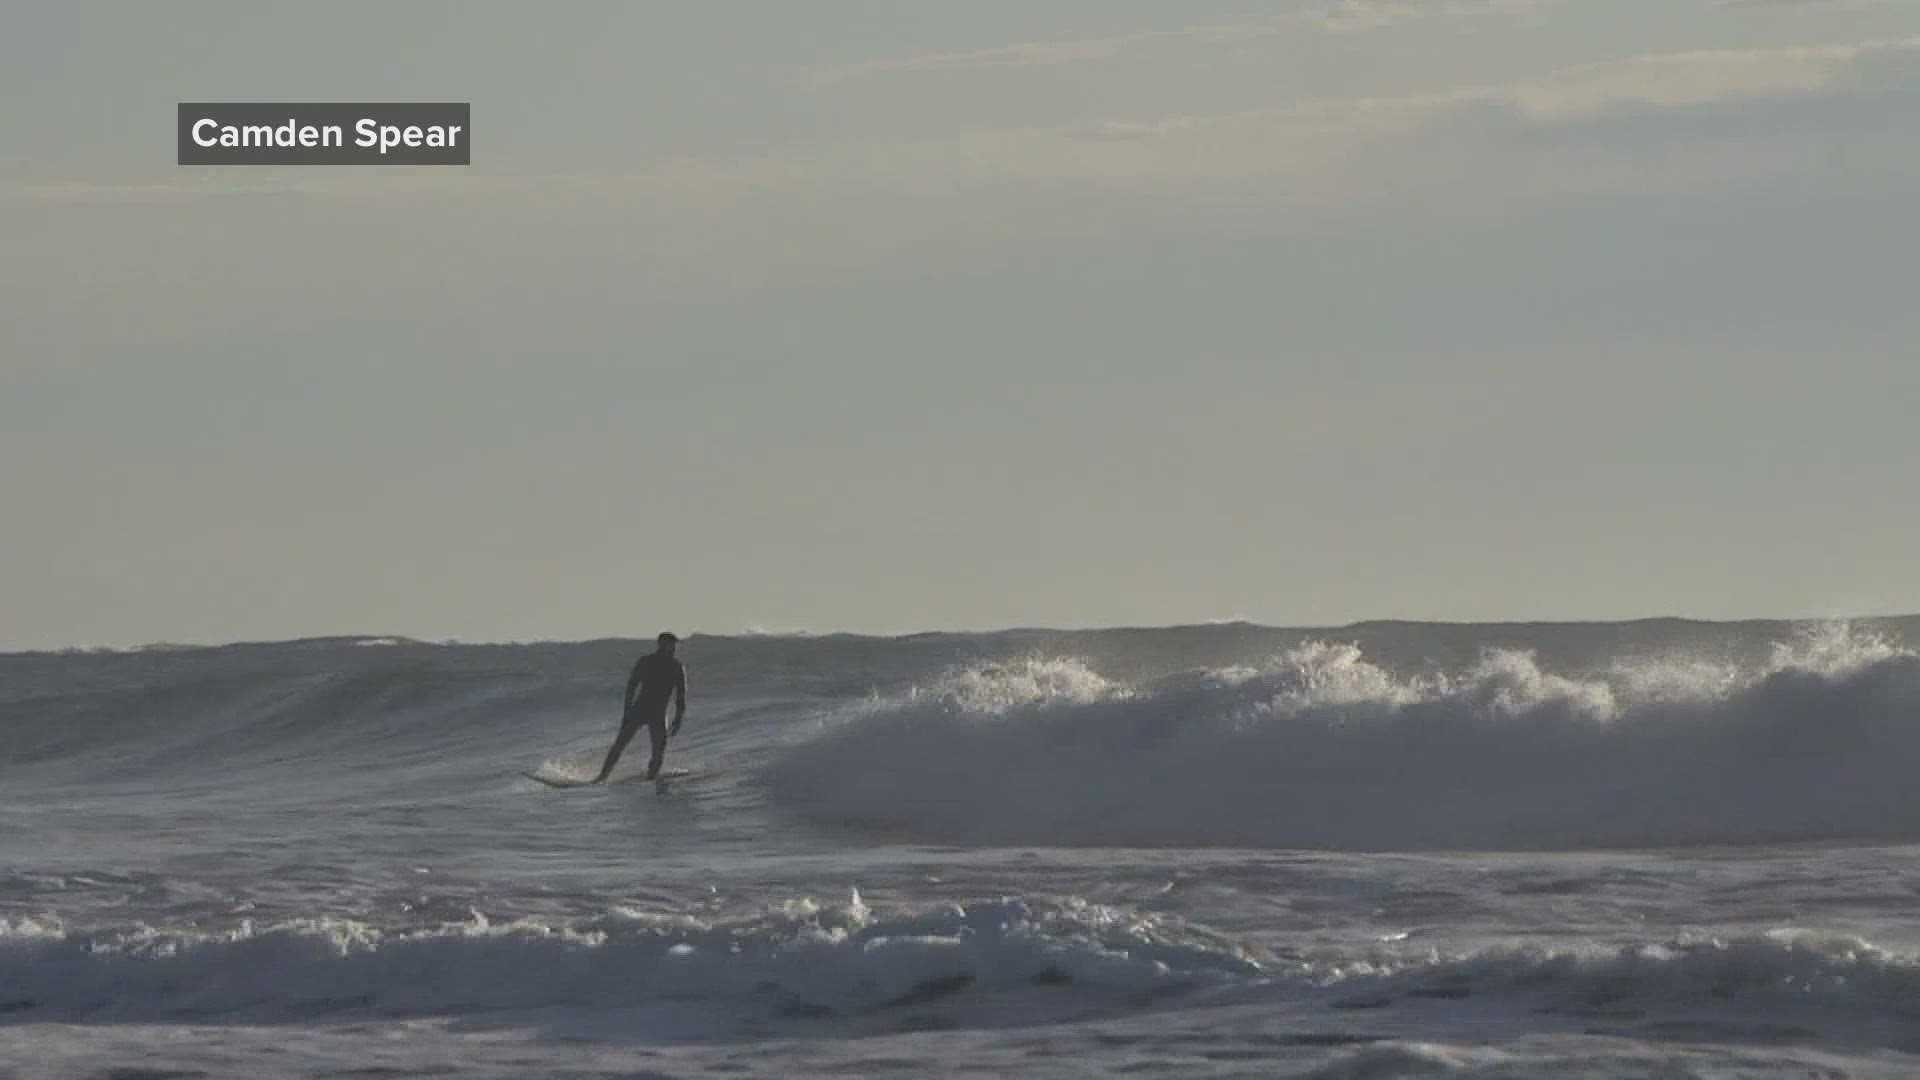 The Co-owner of Black Point Surf Shop in Scarborough has seen more surfers going out in the cold to catch the waves.